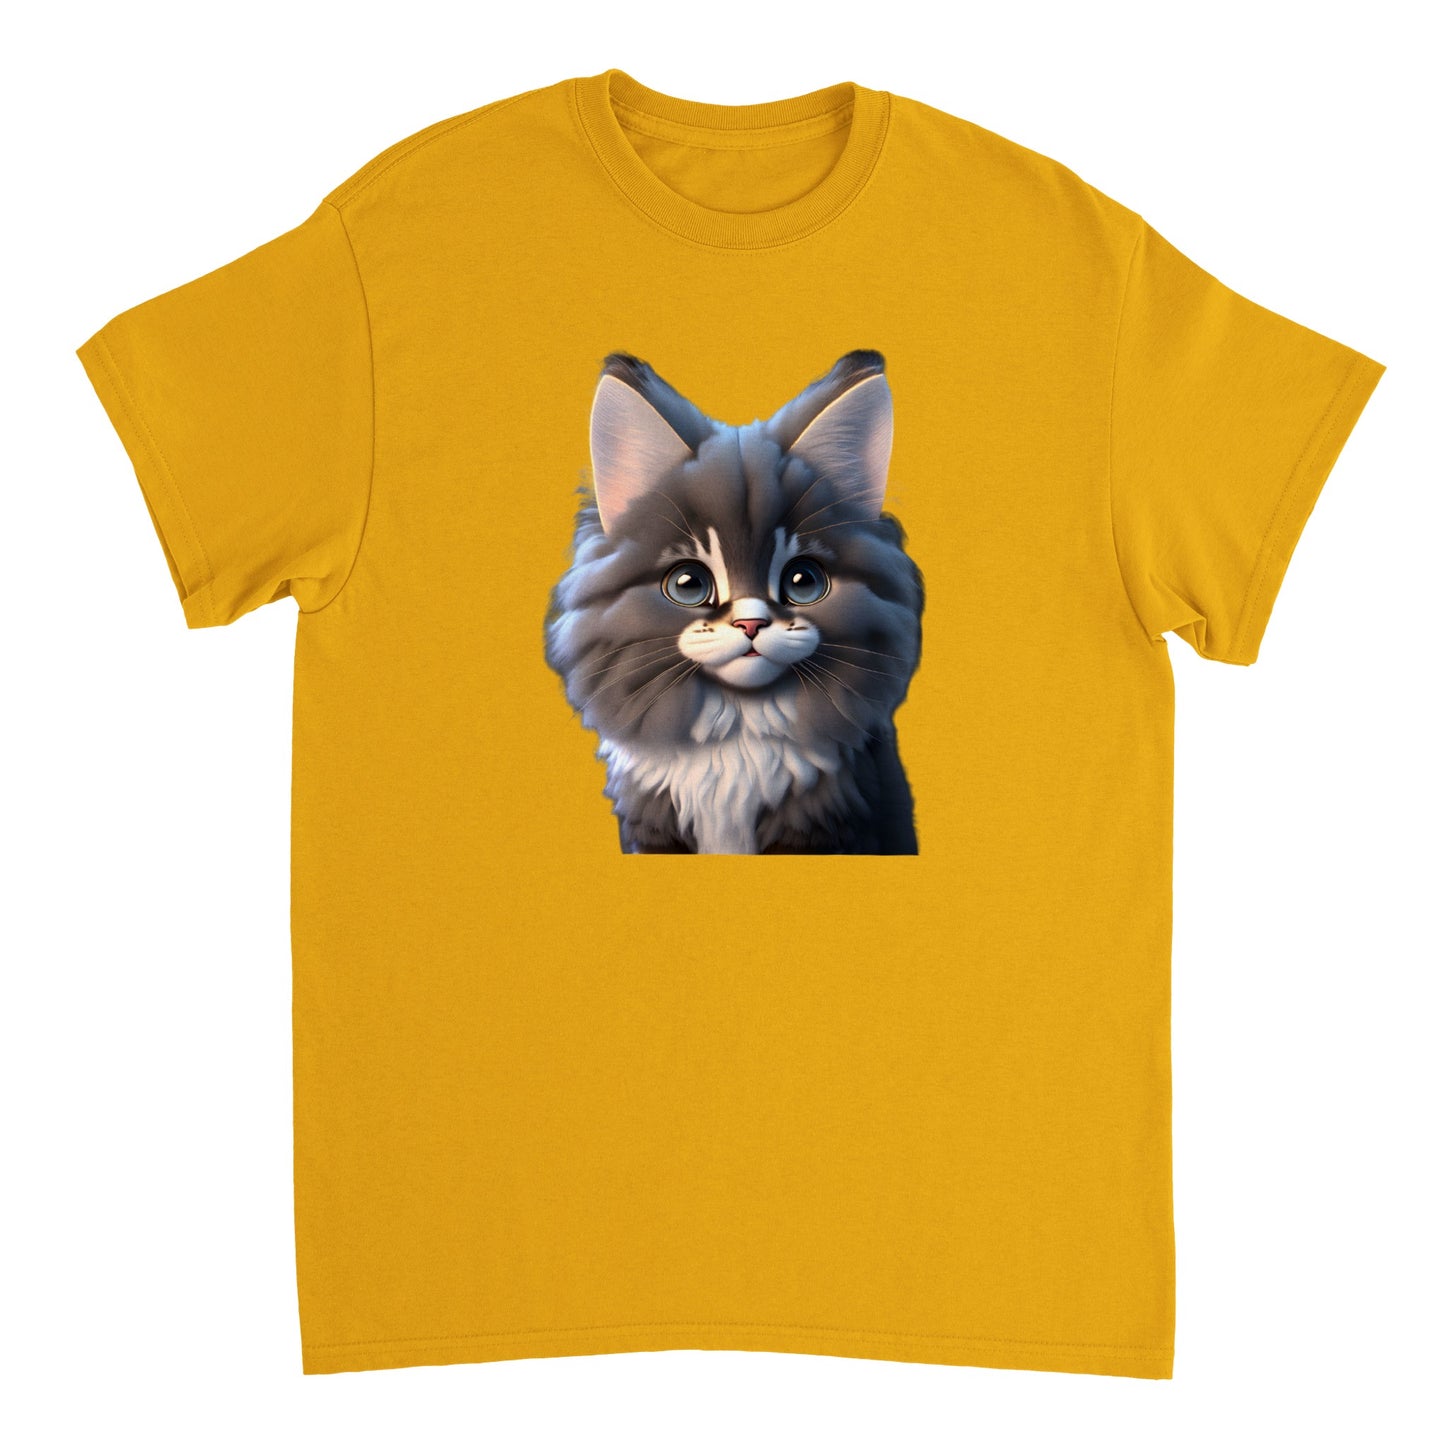 Adorable, Cool, Cute Cats and Kittens Toy - Heavyweight Unisex Crewneck T-shirt 9